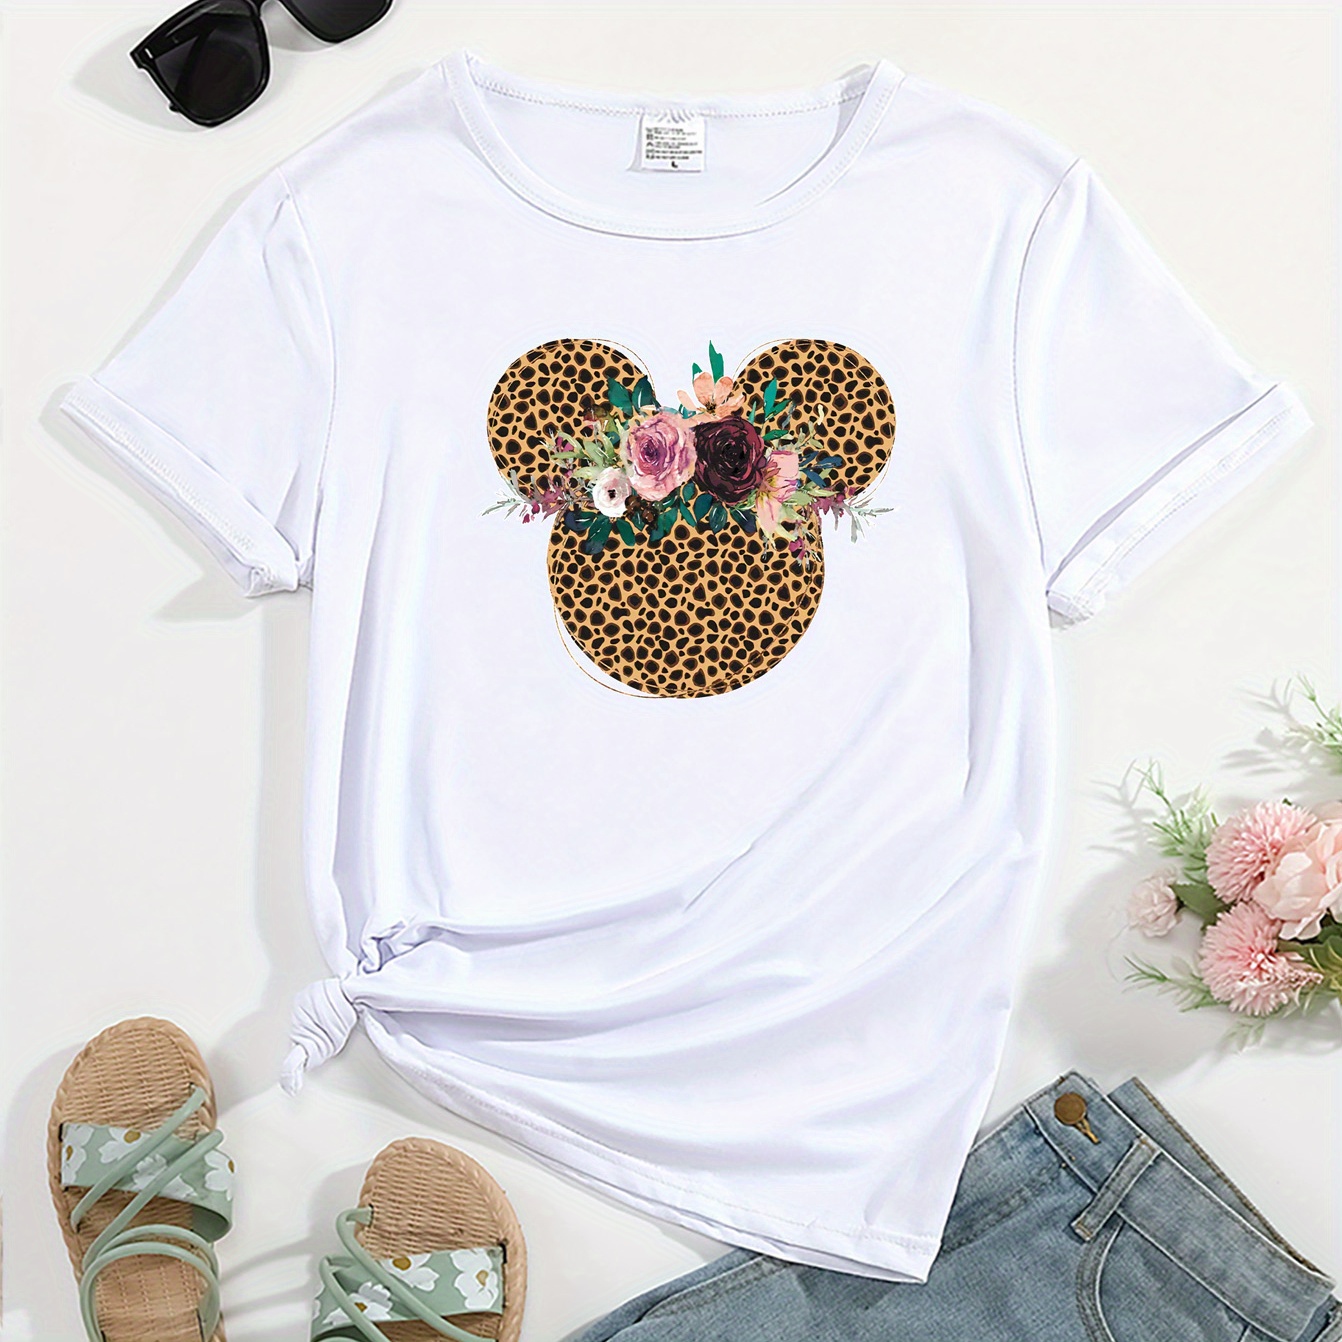 

Leopard Print Cartoon Mouse & Floral Graphic Short Sleeves Sports Tee, Round Neck Workout Causal T-shirt Top, Women's Activewear